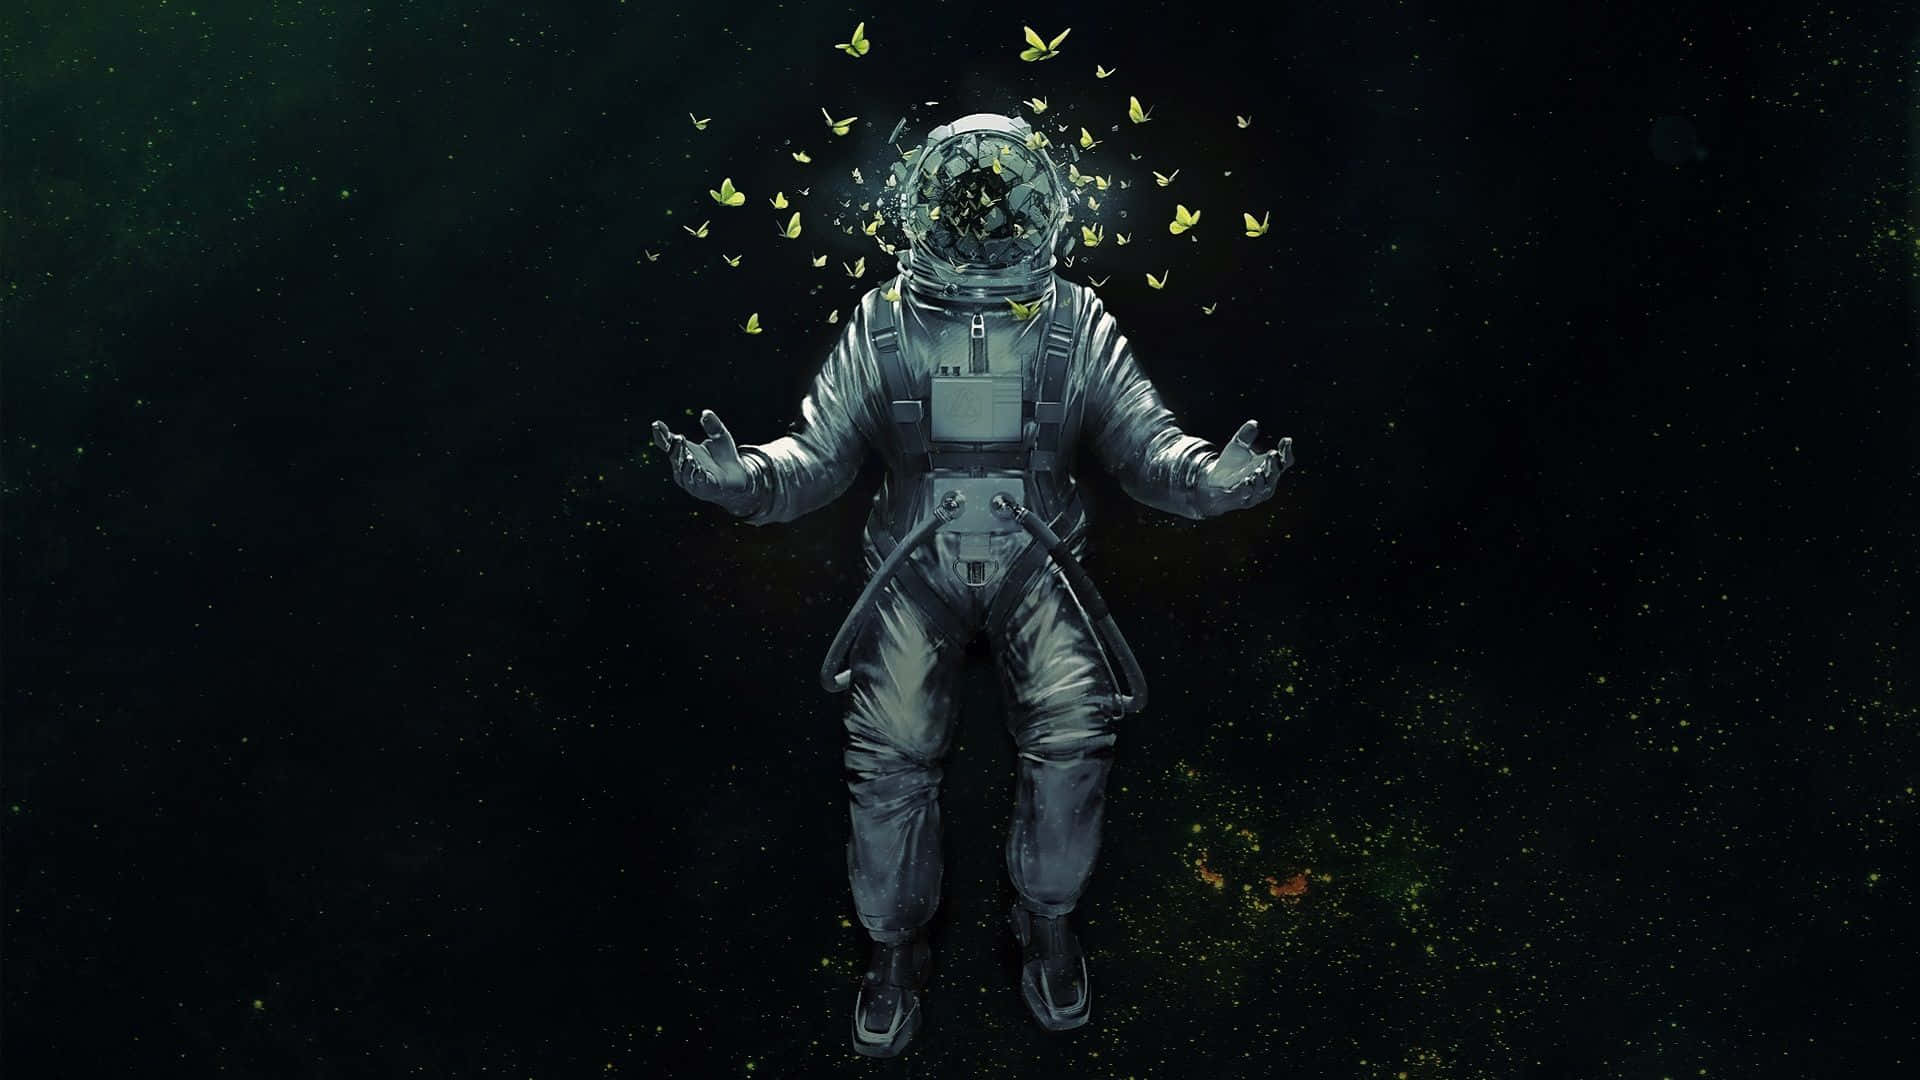 An astronaut admires the beauty of space Wallpaper